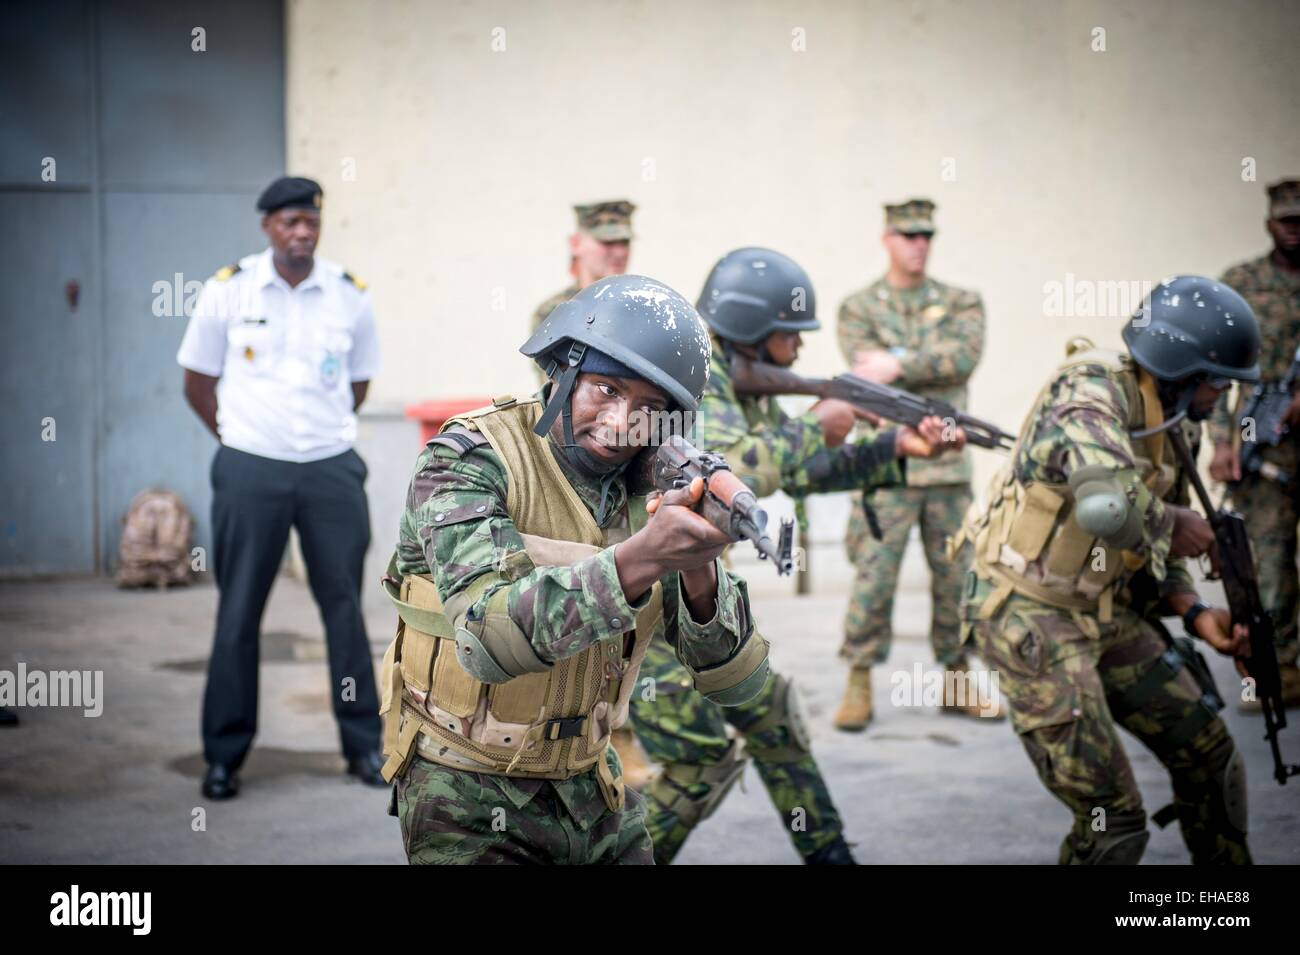 Angolan marines demonstrate close quarter battle techniques during a training session with U.S. Marines March 4, 2015 in Luanda, Angola. Stock Photo